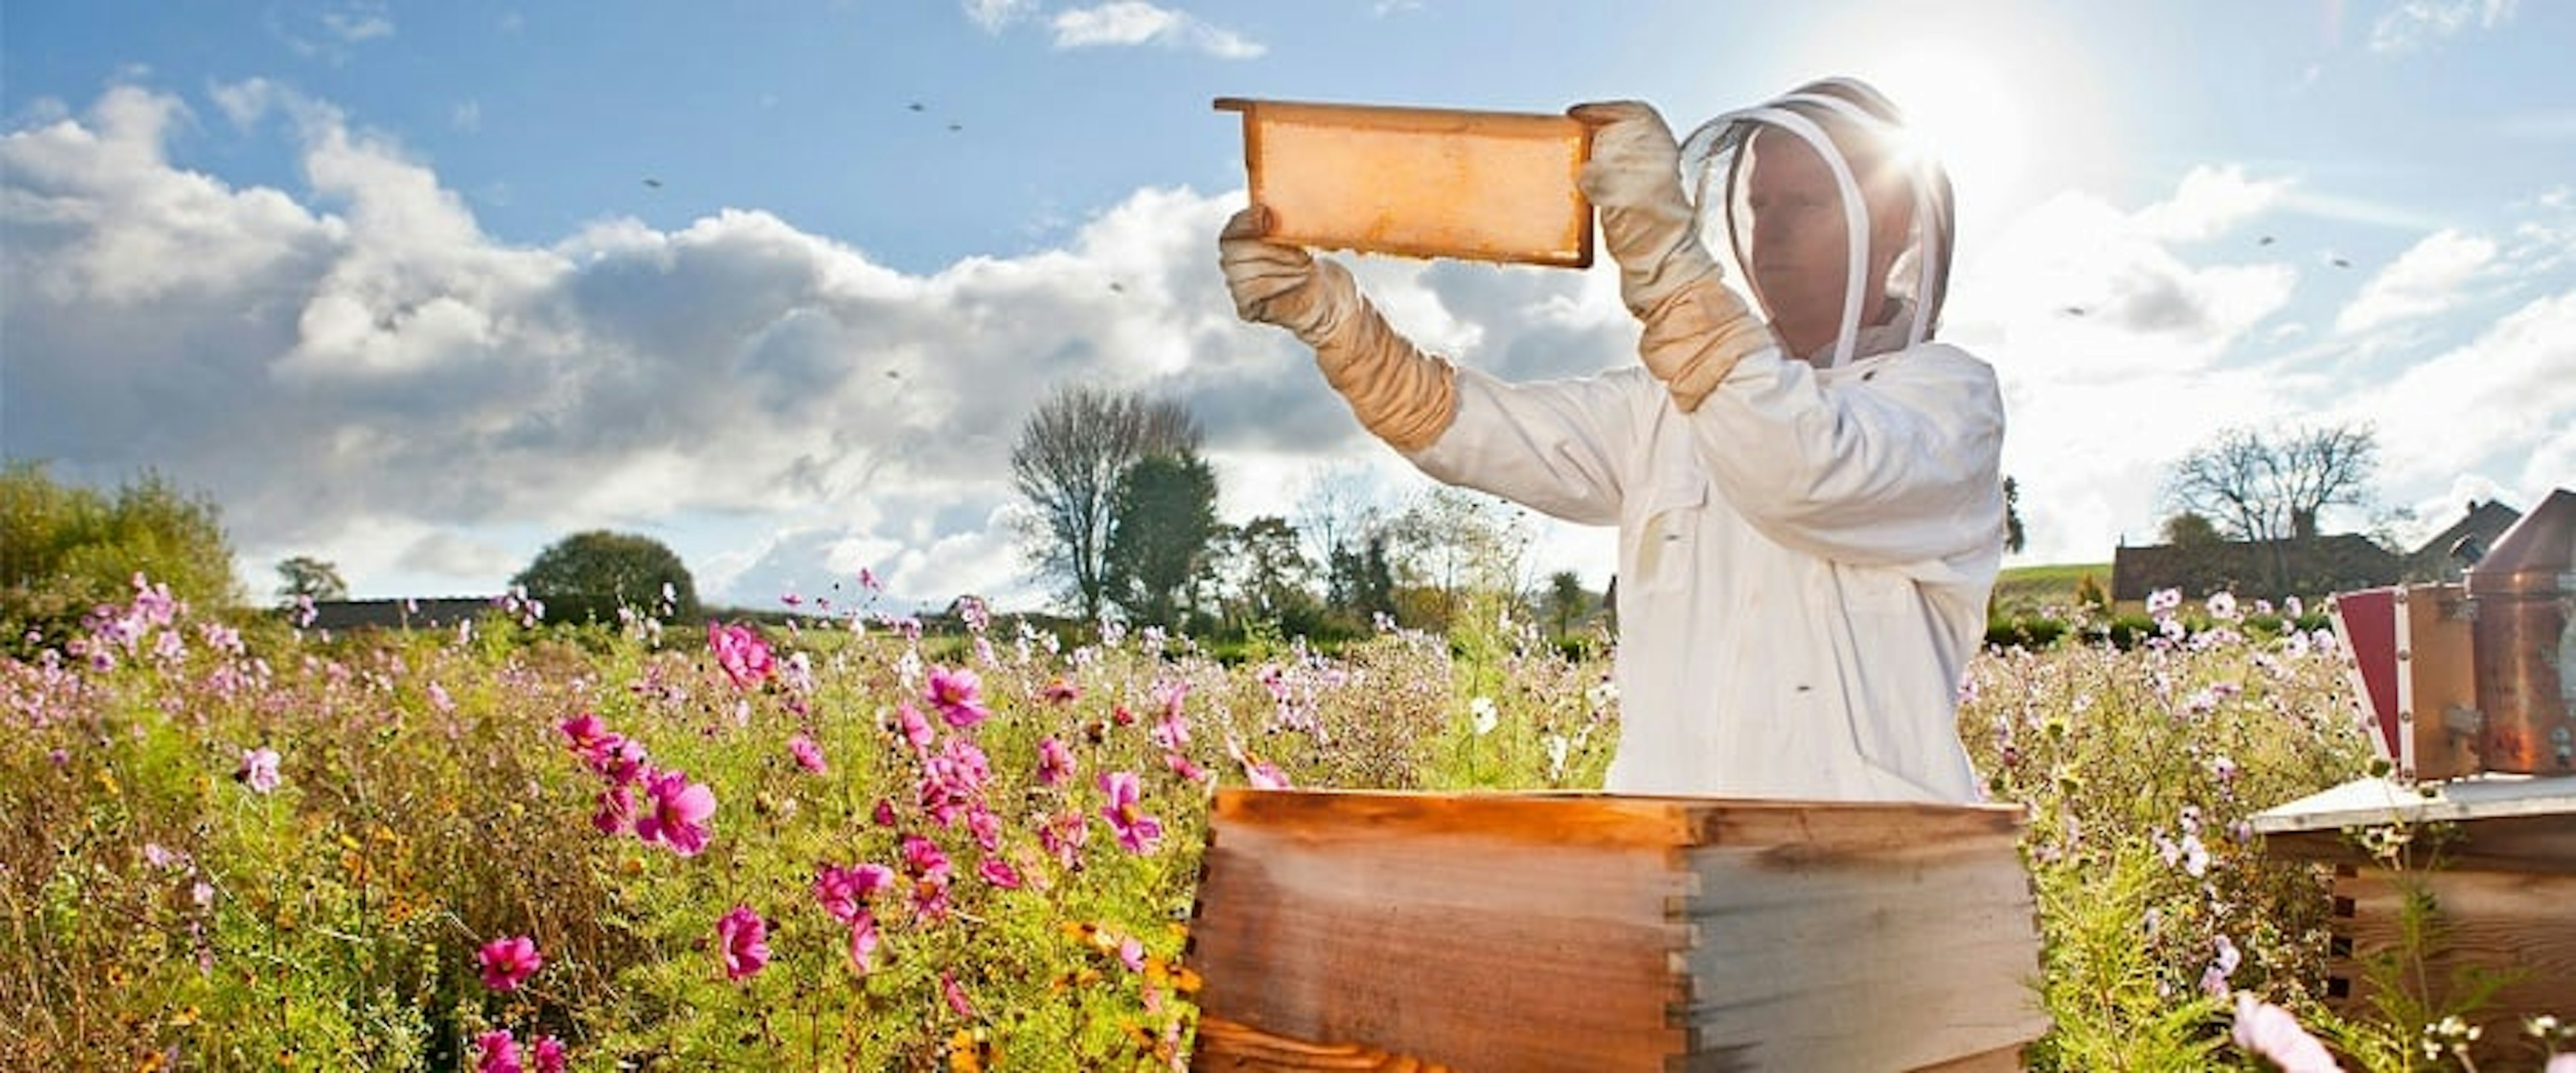 Bee keeper in a sunny field checking hive